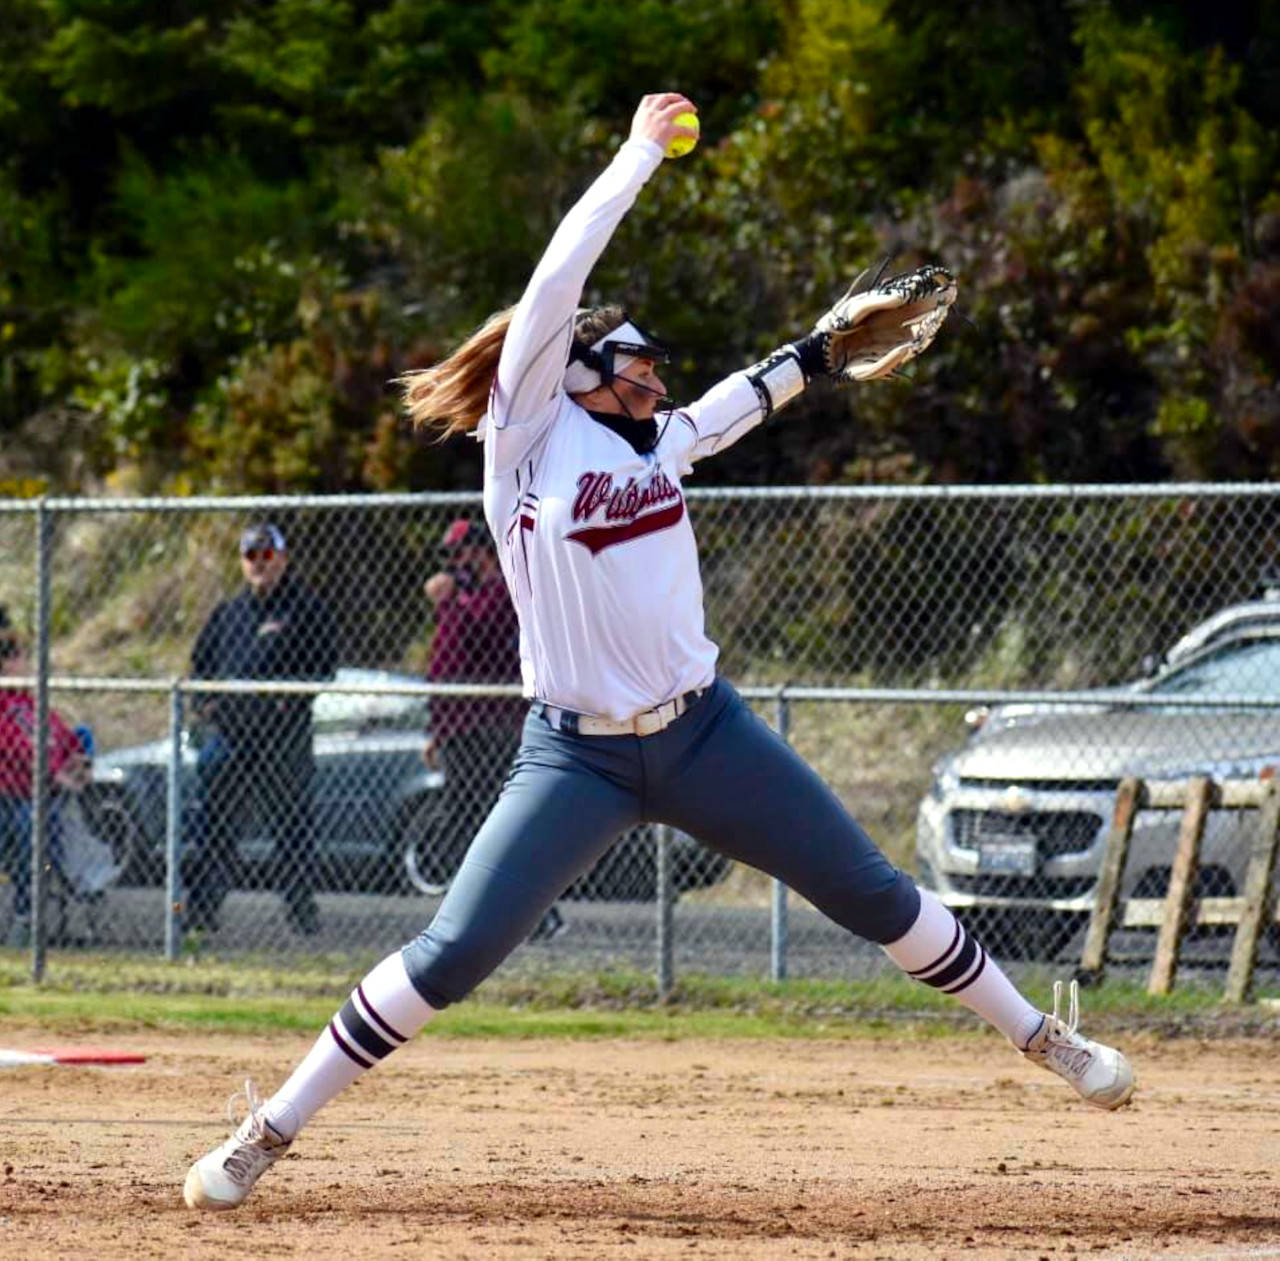 PHOTO BY JENNIFER RAFFELSON Ocosta pitcher Annika Hollingsworth lead the Wildcats to a 3-0 win over Toutle Lake in the quarterfinals of the 2B Division 4 Softball Tournament on Tuesday in Westport.